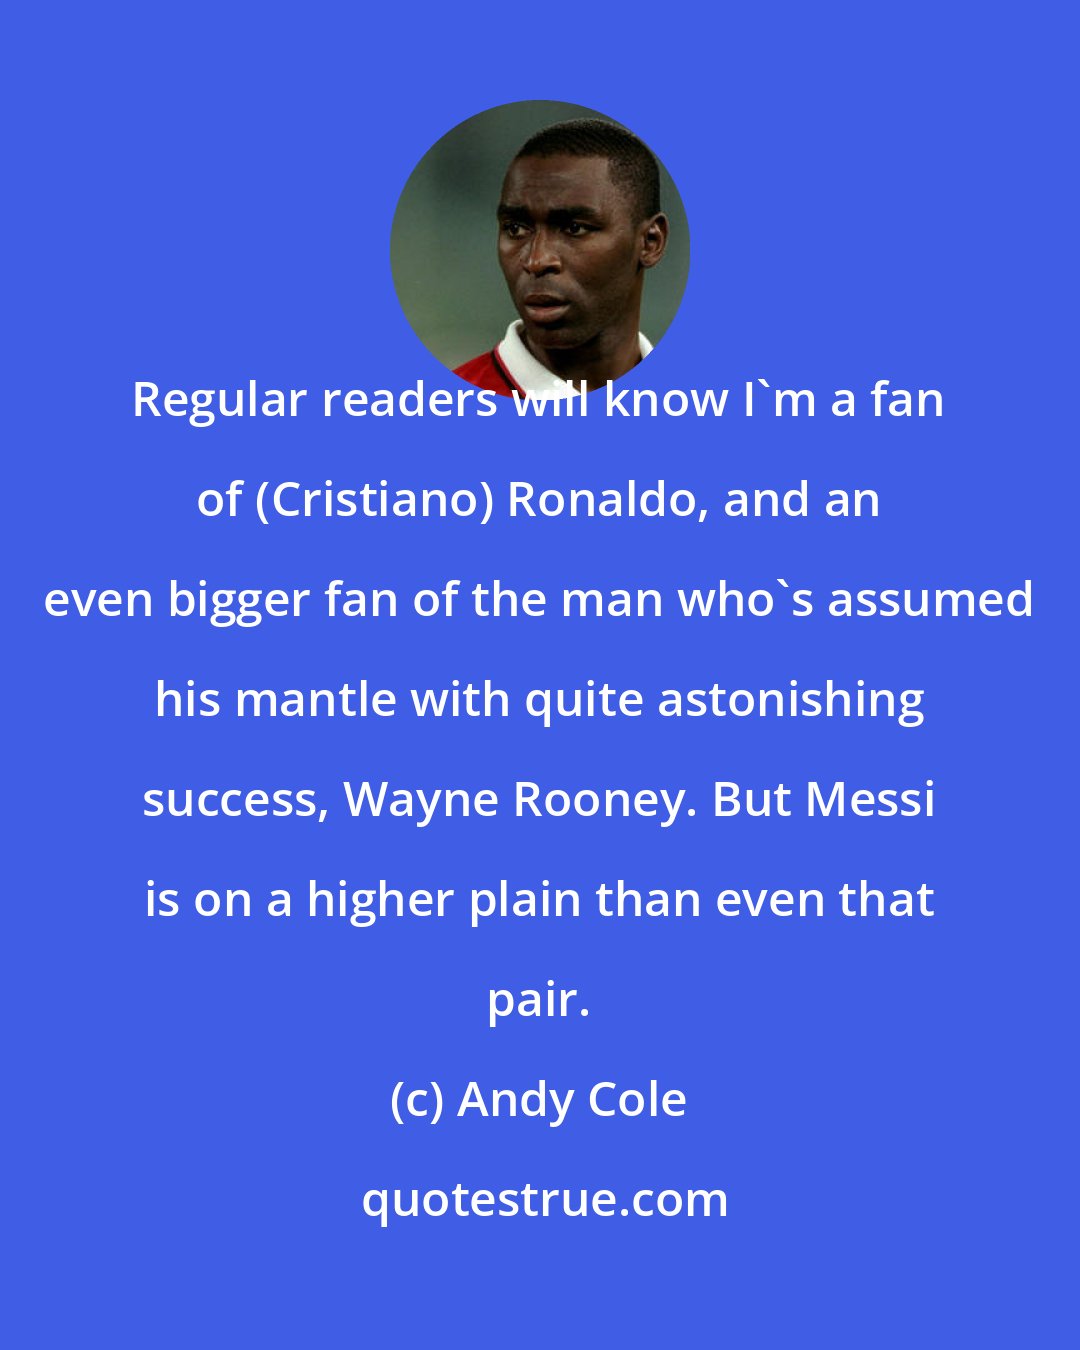 Andy Cole: Regular readers will know I'm a fan of (Cristiano) Ronaldo, and an even bigger fan of the man who's assumed his mantle with quite astonishing success, Wayne Rooney. But Messi is on a higher plain than even that pair.